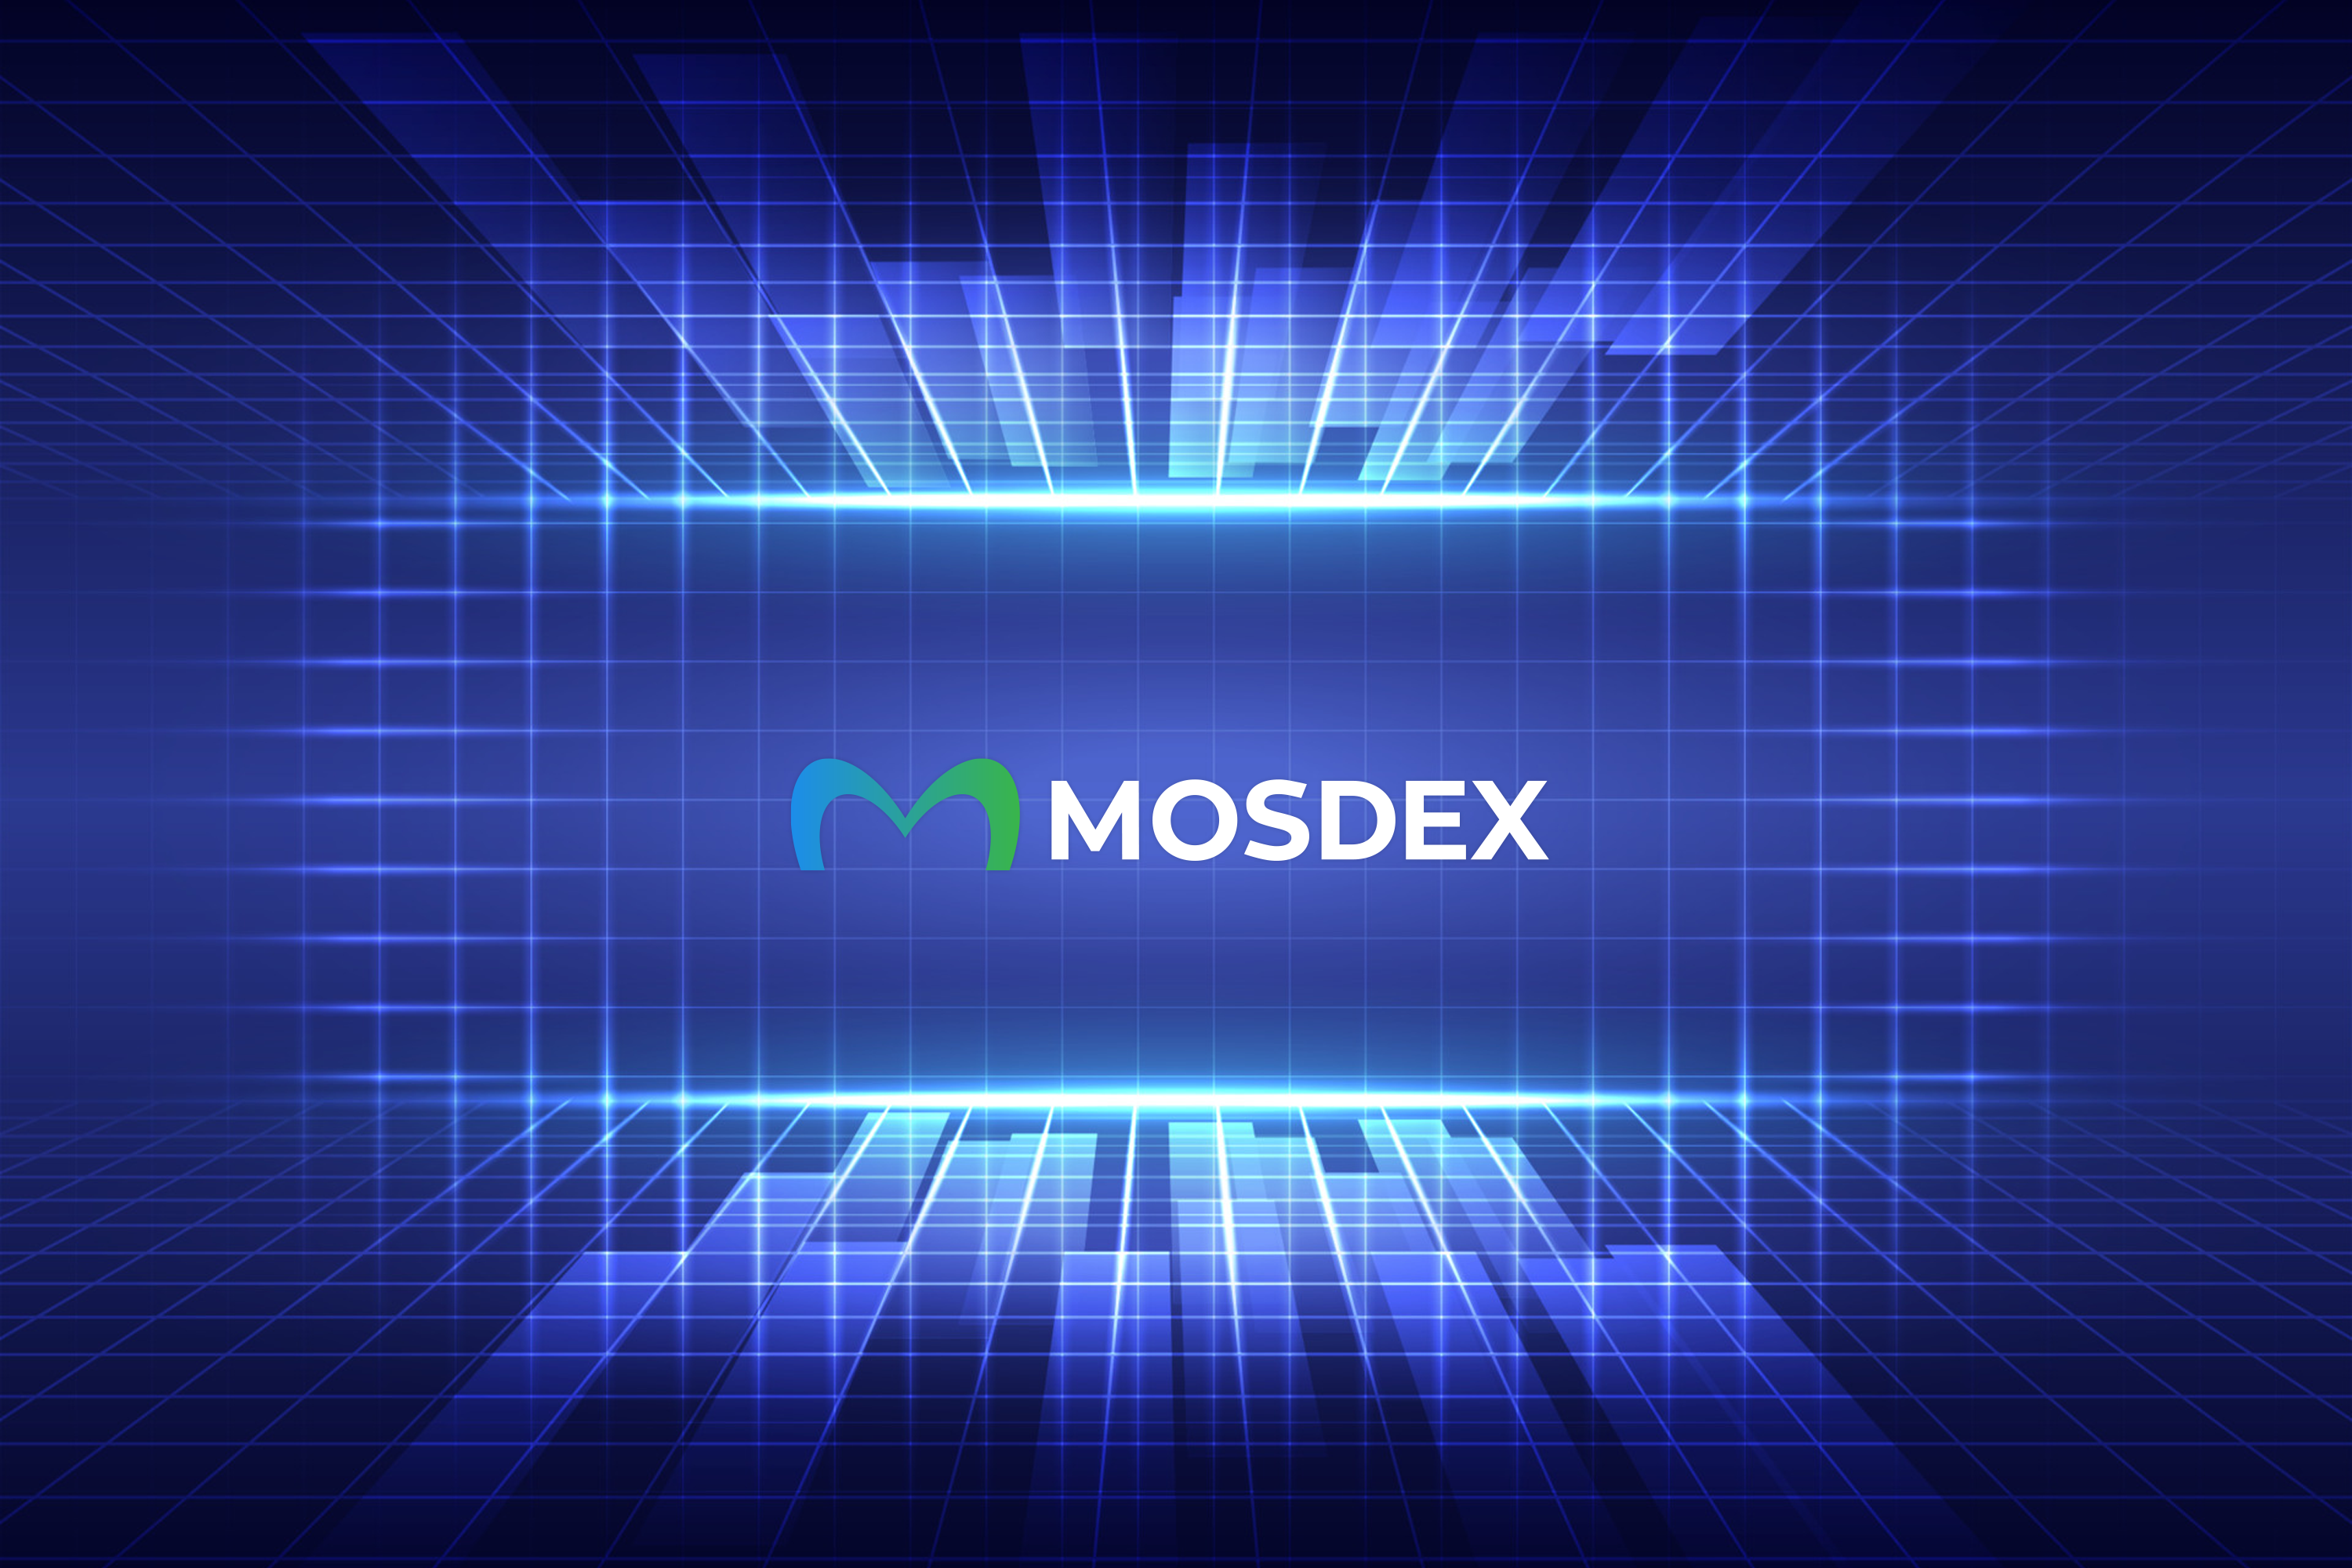 @cryptoscripts/mosdex-in-the-future-expanding-the-ecosystem